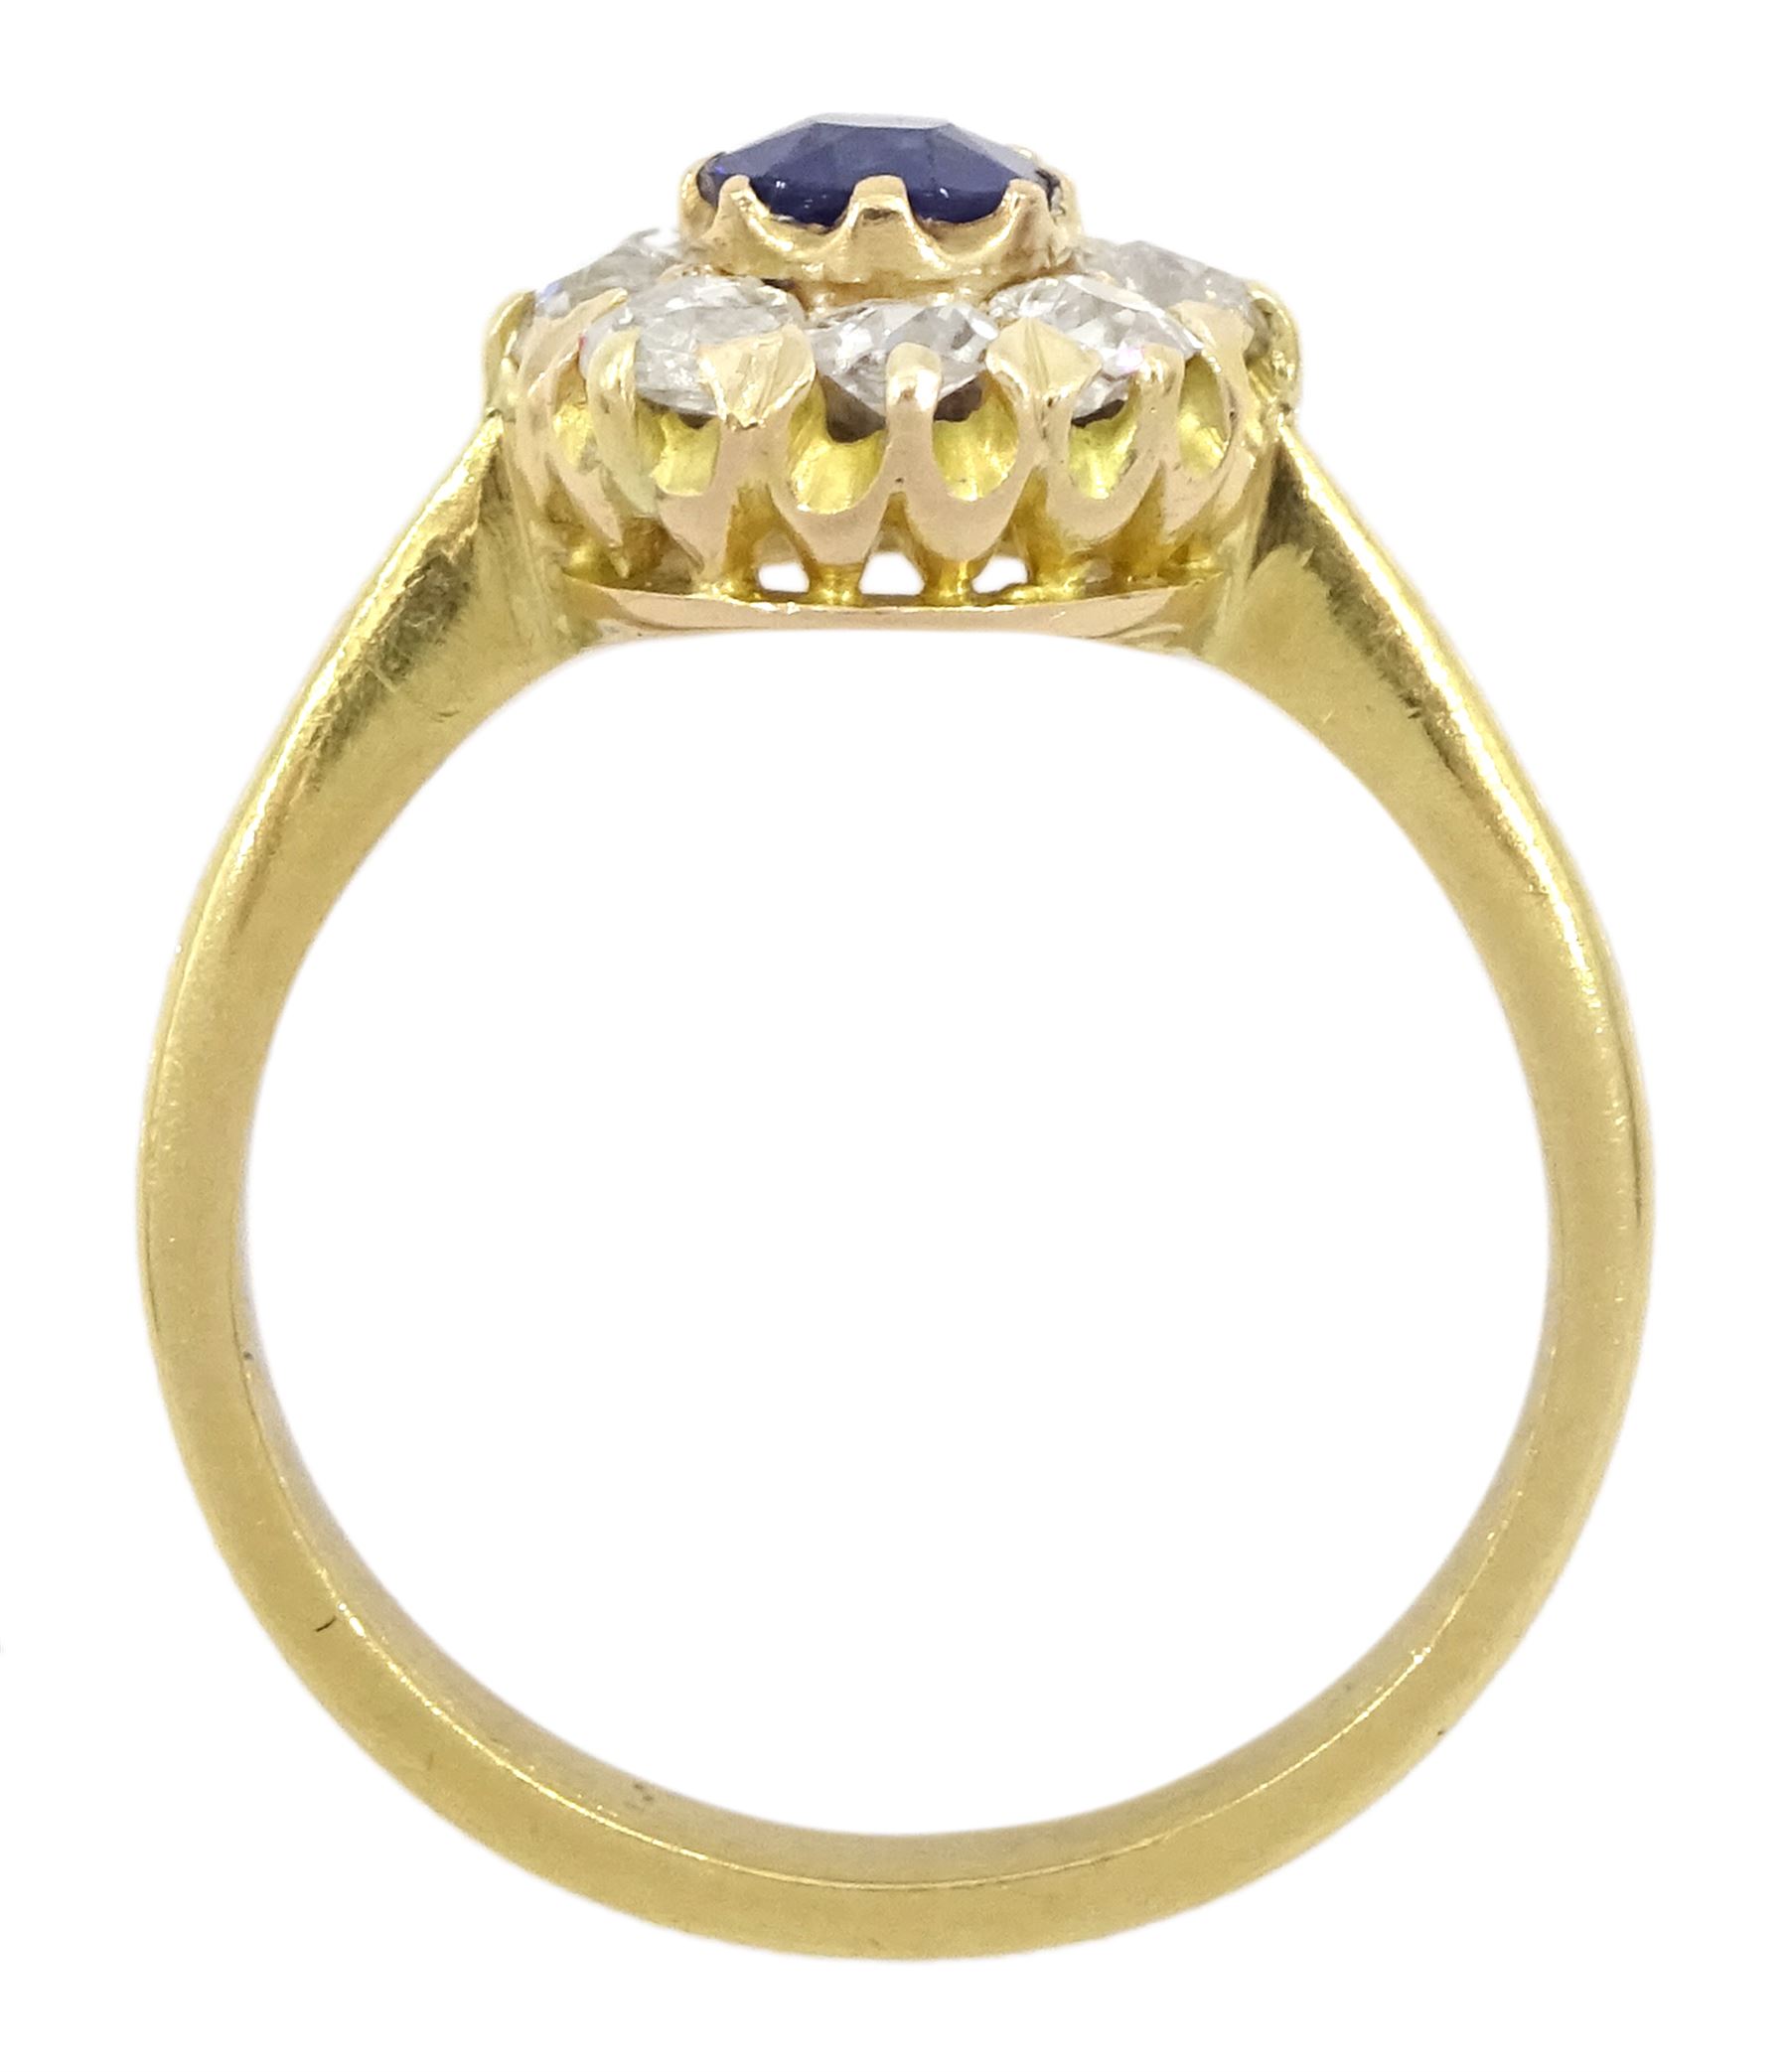 Early 20th century 18ct gold sapphire and old cut diamond cluster ring - Image 4 of 7